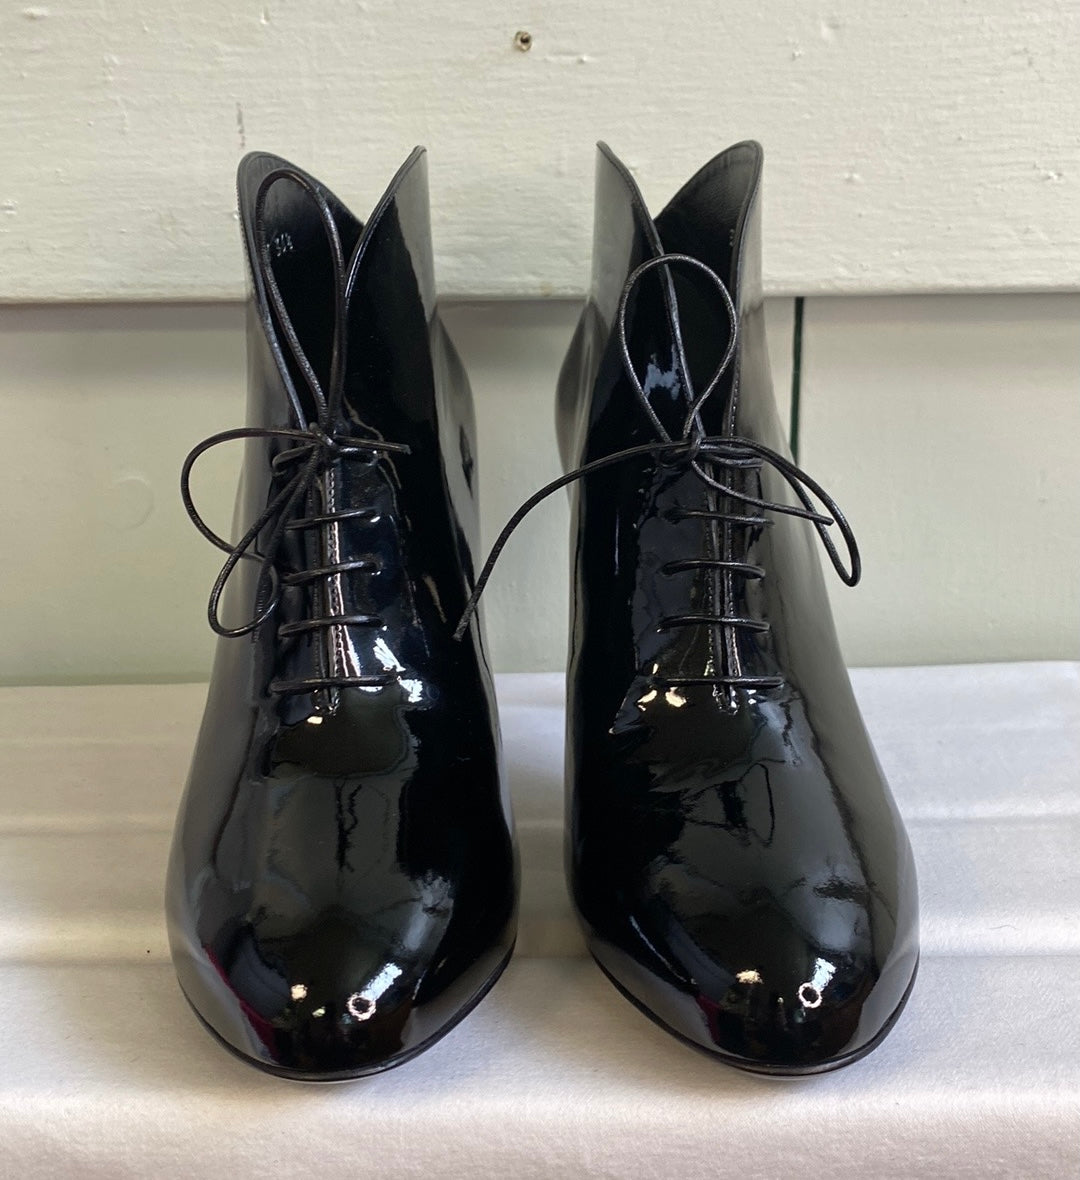 Gucci Kim Lace-Up Patent Leather Booties In Black